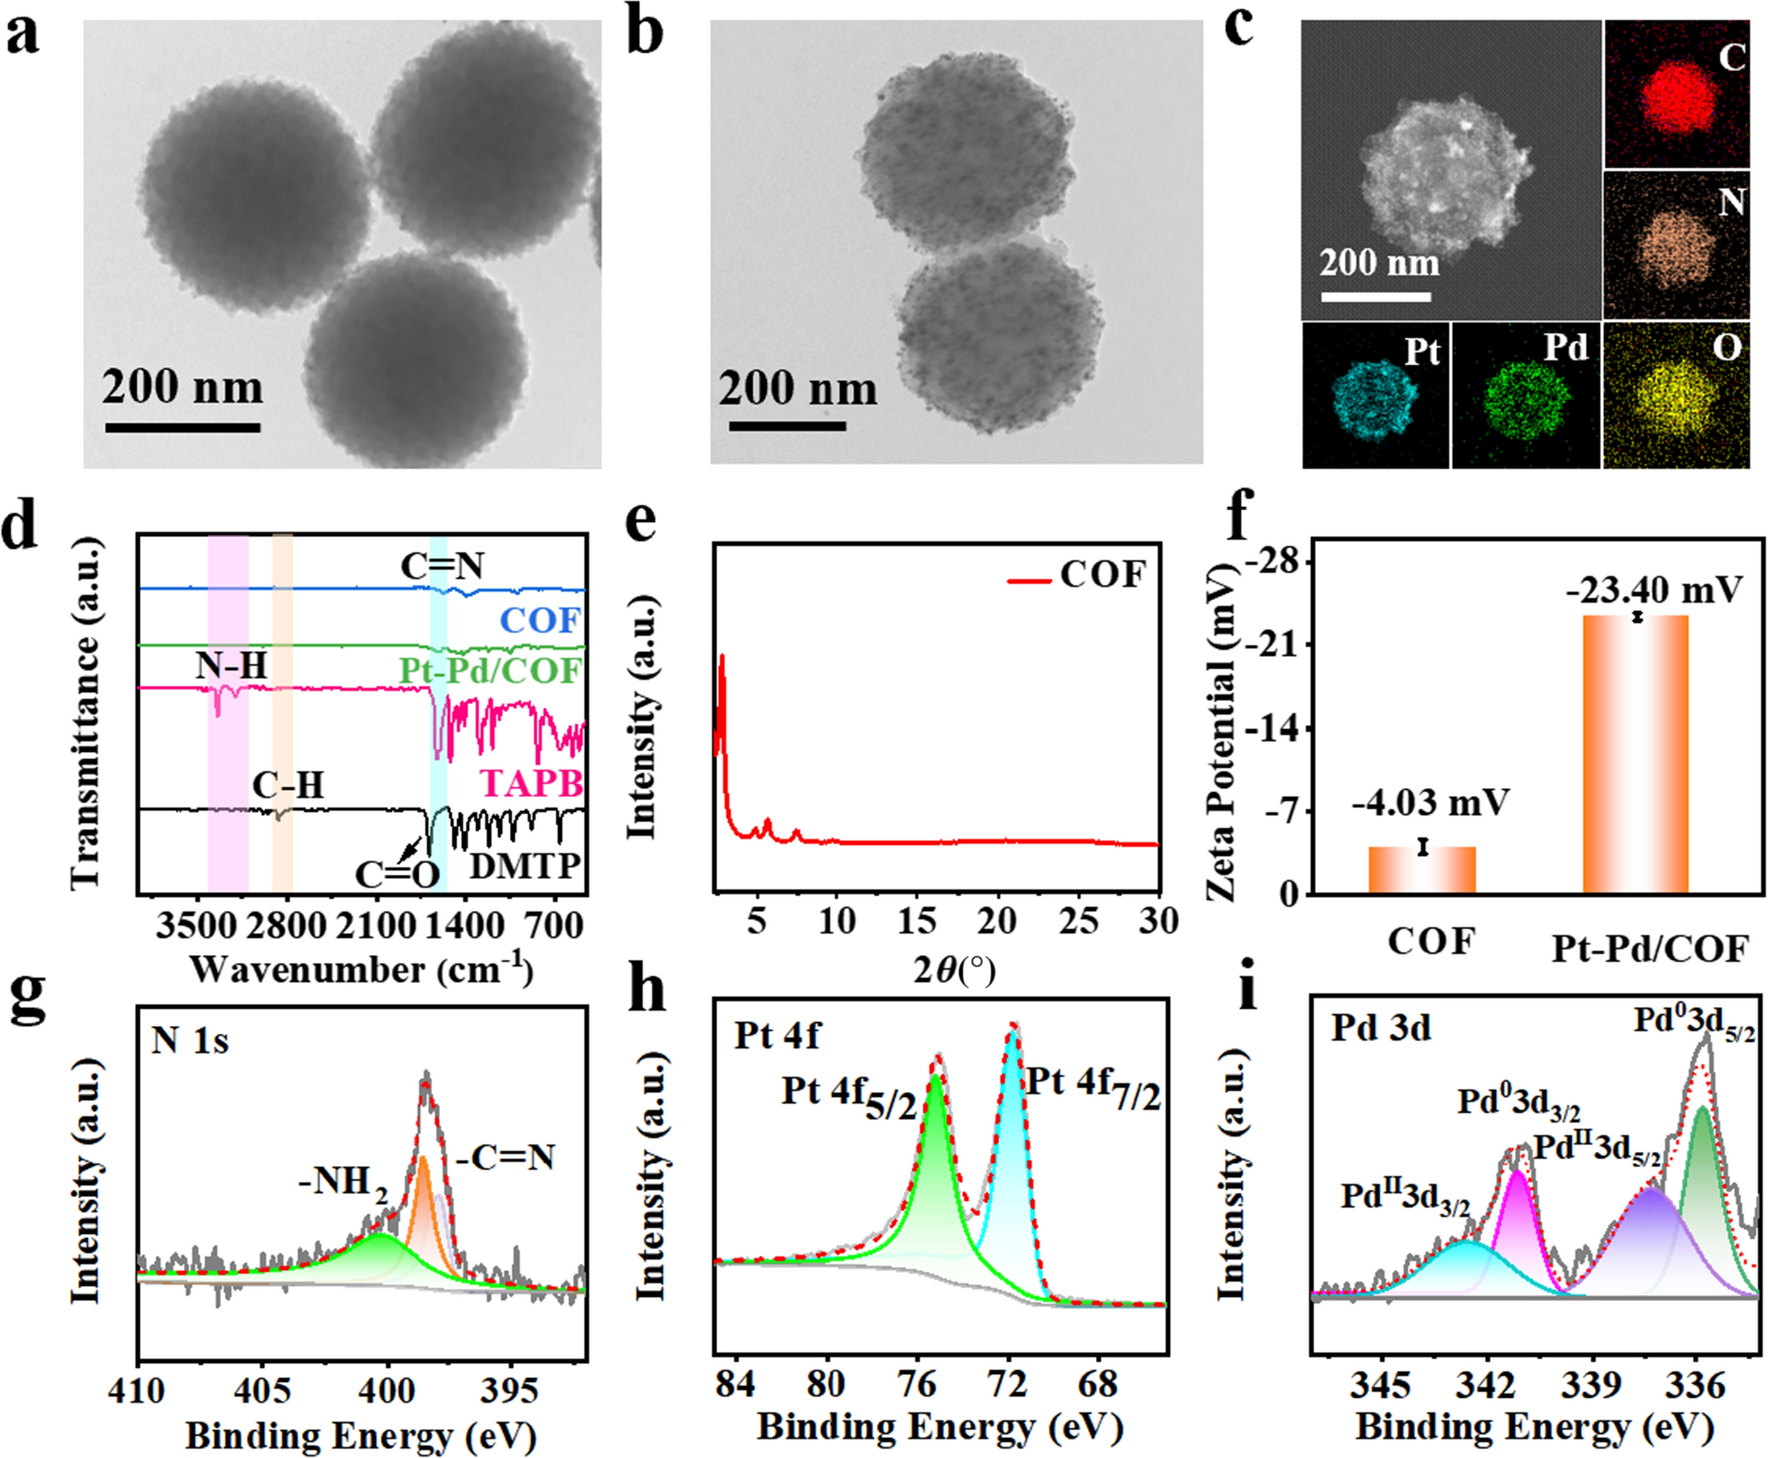 Integrating Bimetallic Nanoparticles with Covalent Organic Frameworks as Multifunctional Nanozyme for Colorimetric Detection of Hydrogen Peroxide and Glutathione